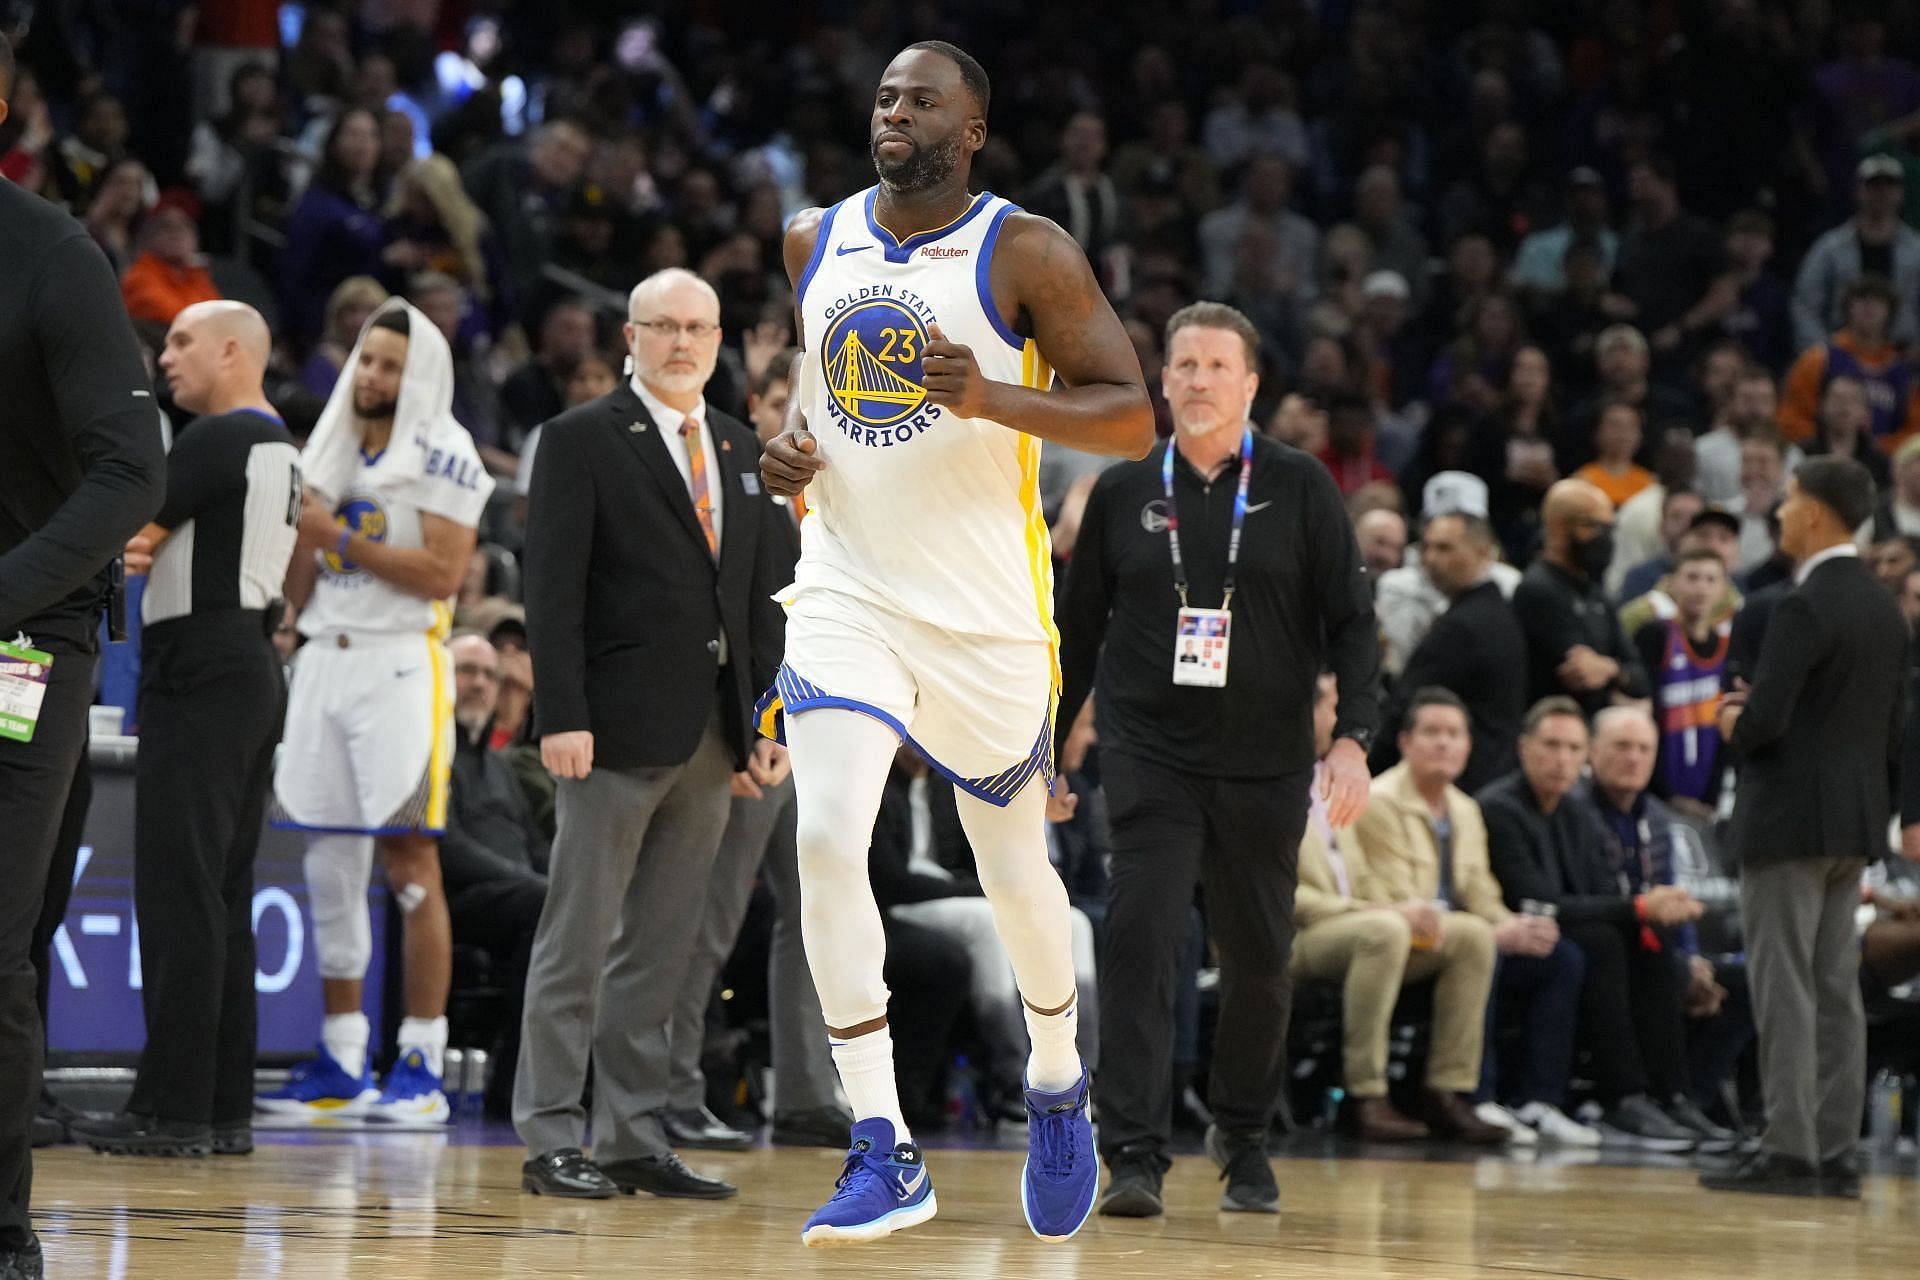 Draymond Green runs off the court after he was tossed out for smacking Jusuf Nurkic.